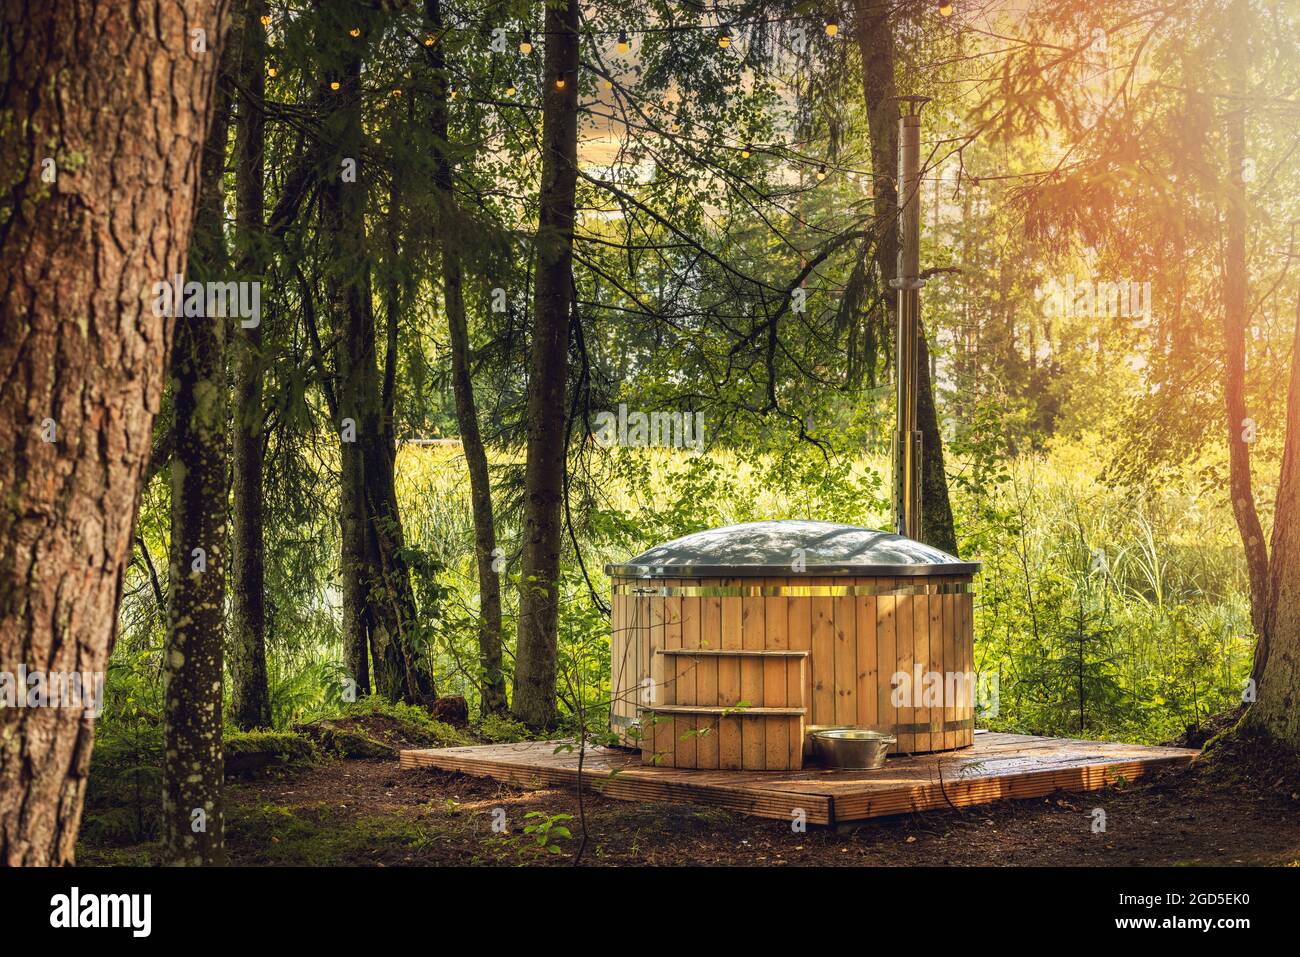 wood fired hot tub in the forest Stock Photo